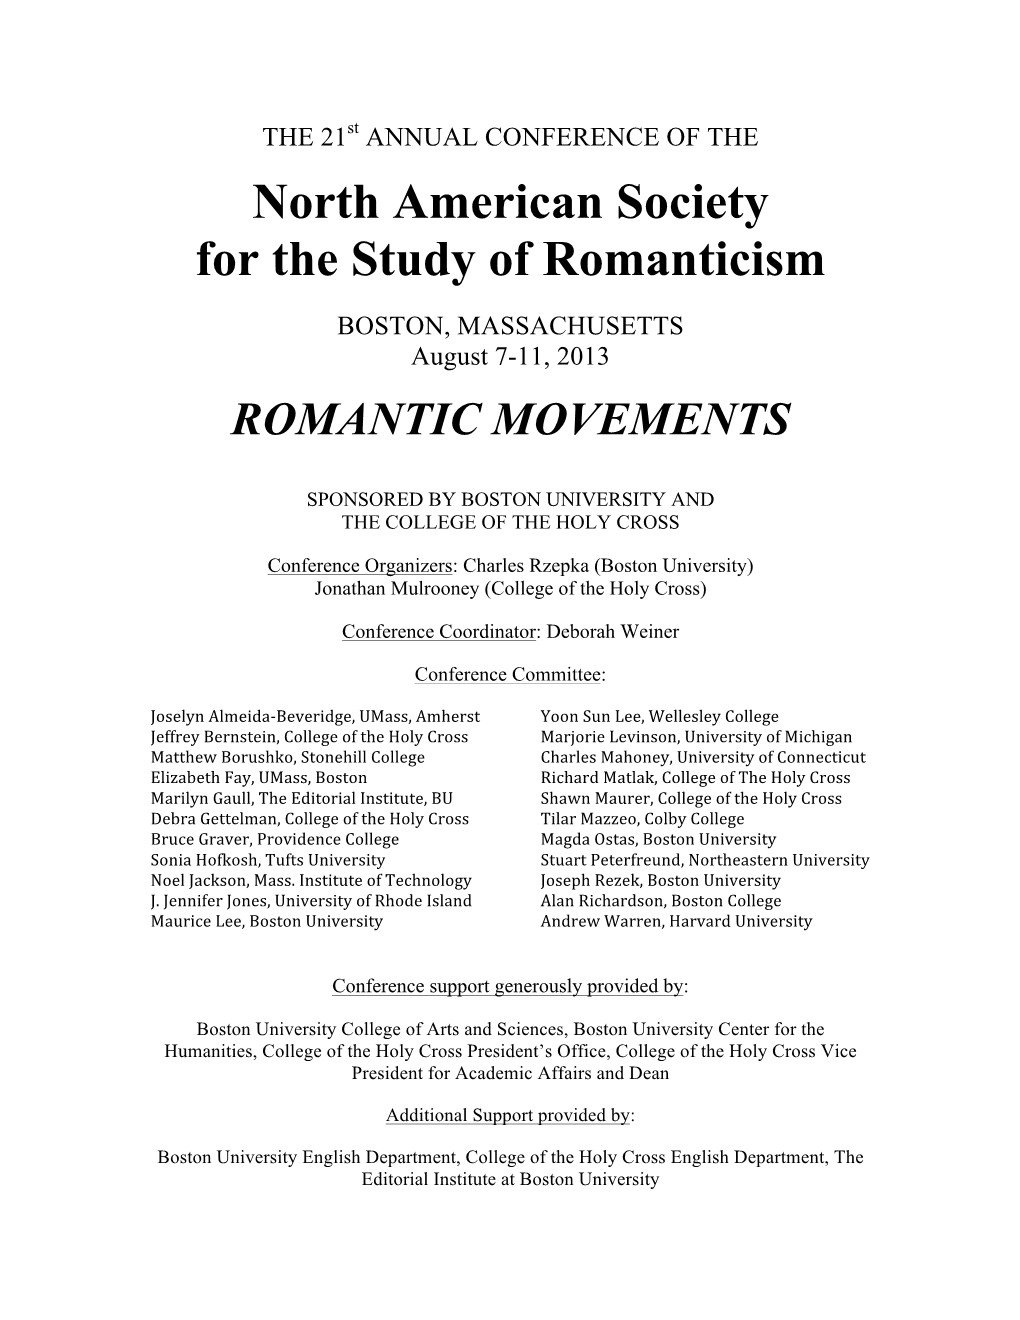 North American Society for the Study of Romanticism